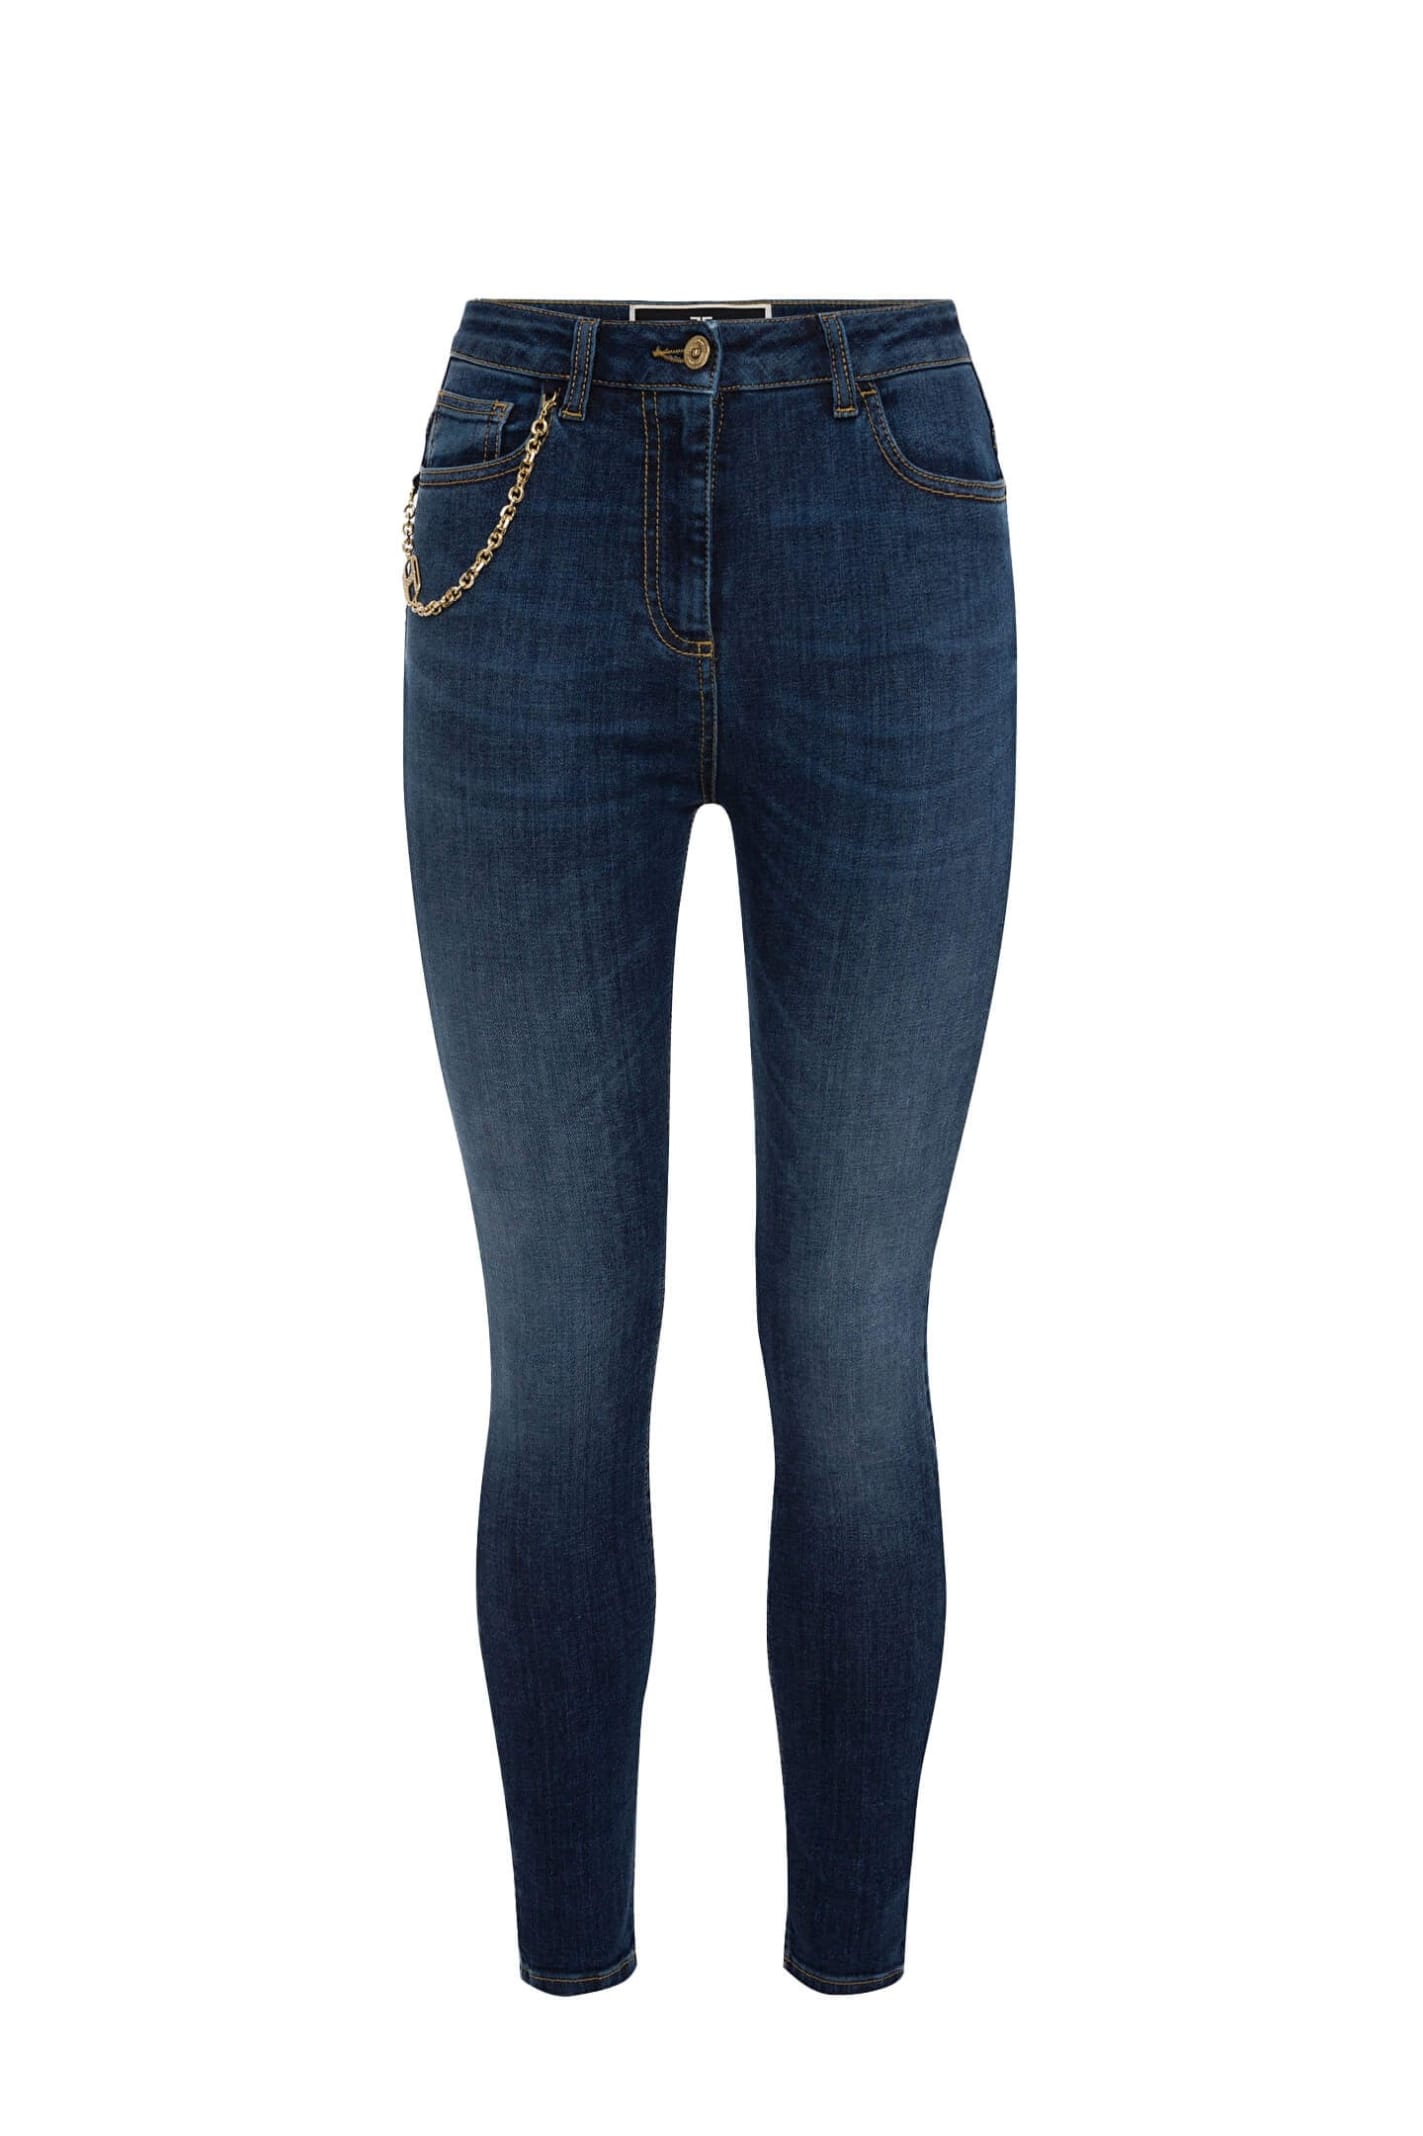 Elisabetta Franchi Blue Skinny Jeans With Chain